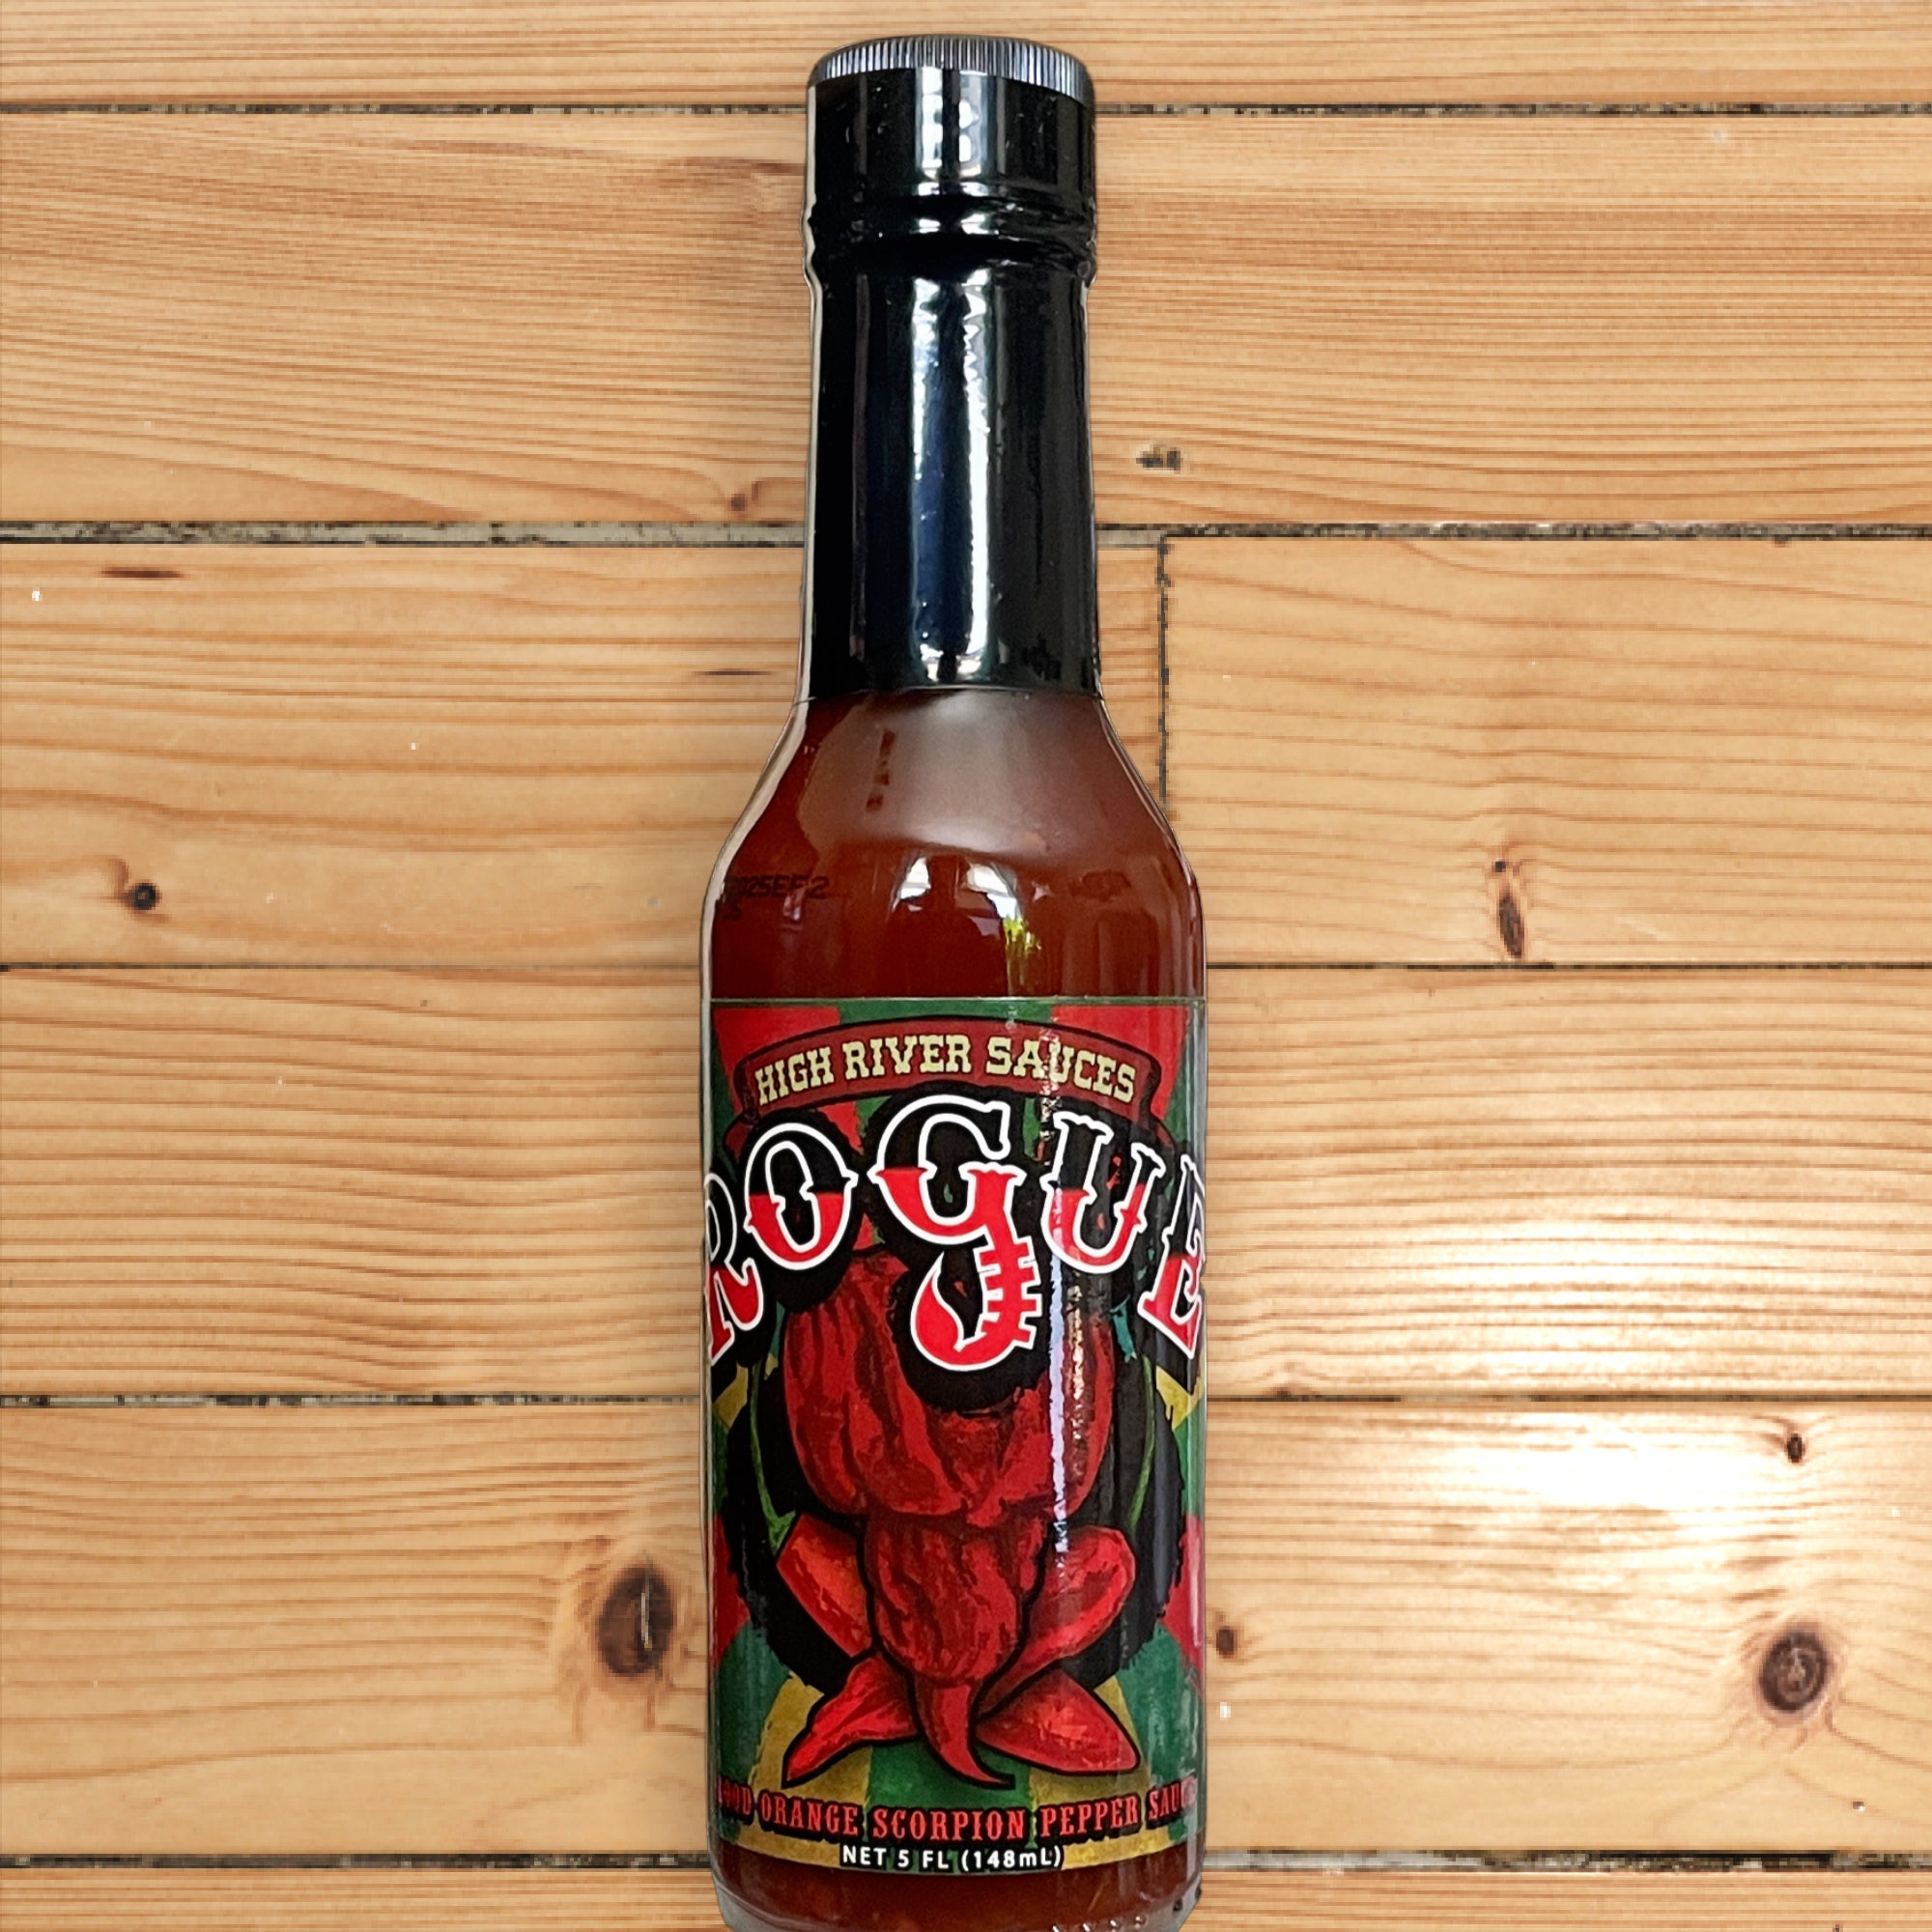 Red River Hot Sauce